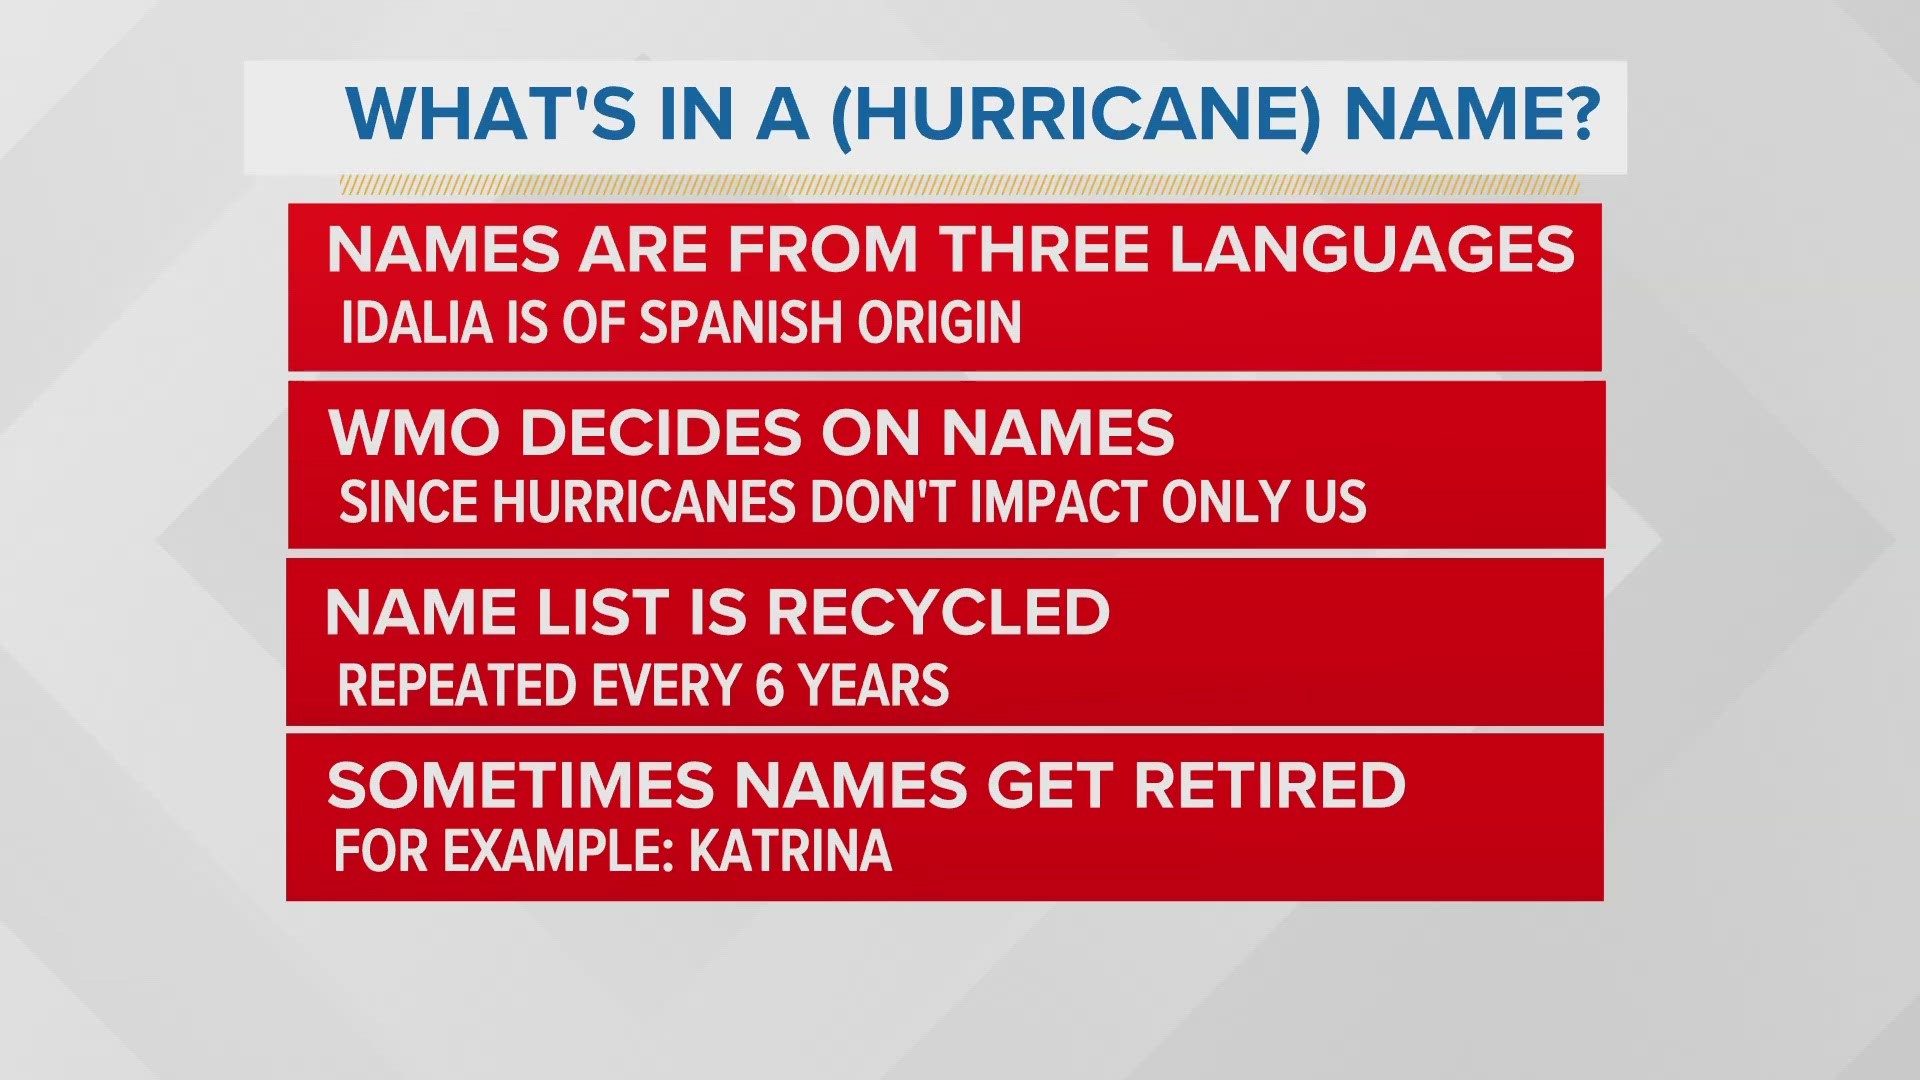 The World Meteorological Organization (not the National Hurricane Center) decides the names since tropical cyclones don't only affect the United States.